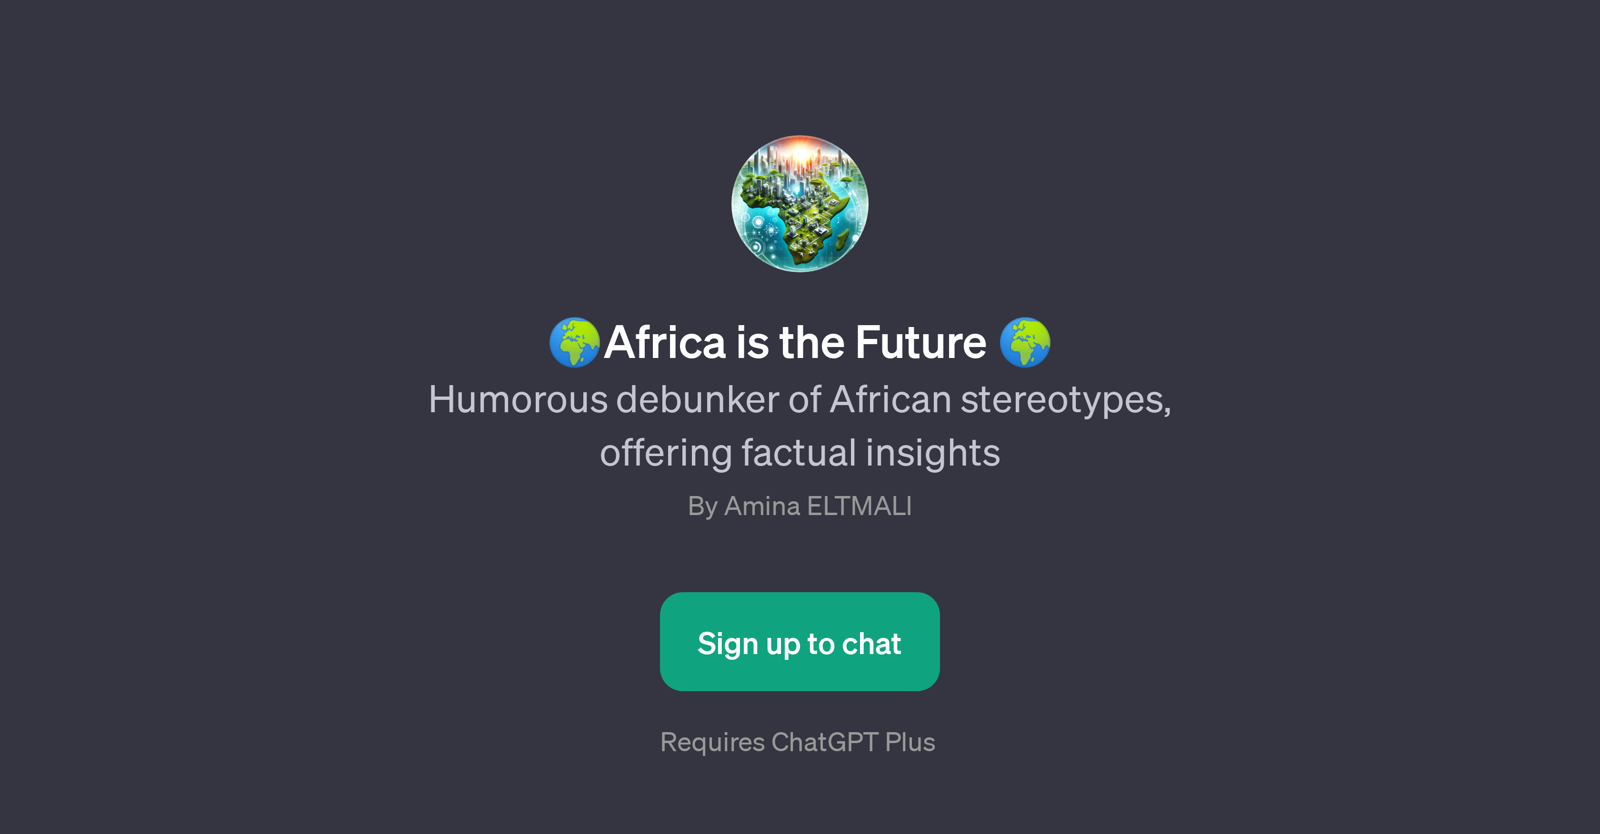 Africa is the Future website